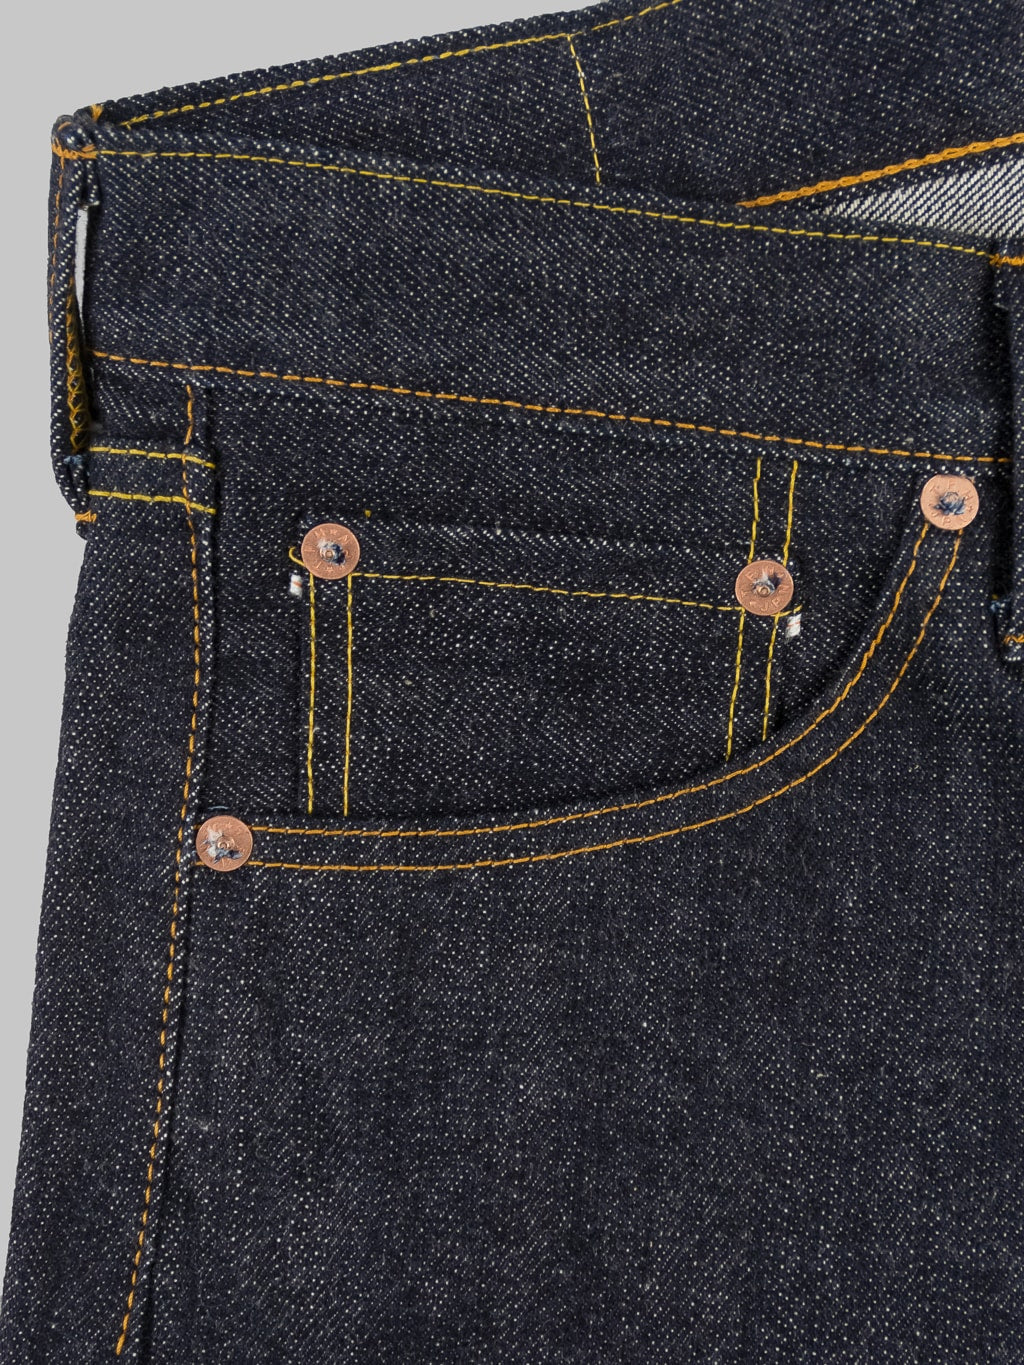 The Flat Head 3004 Regular Straight Jeans coin pocket